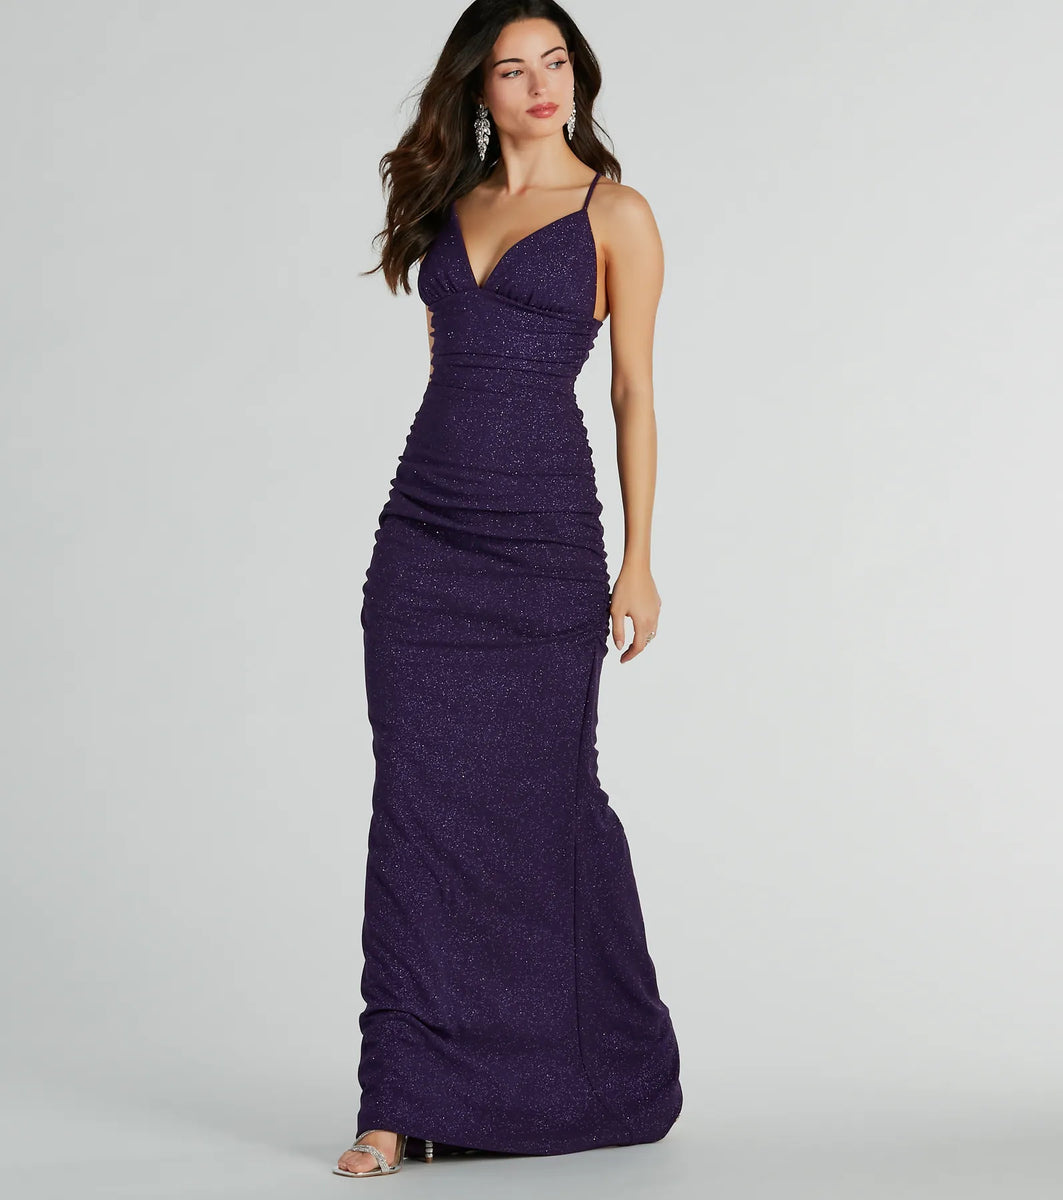 Windsor May Lace-Up Mermaid Glitter Formal Dress | Hamilton Place